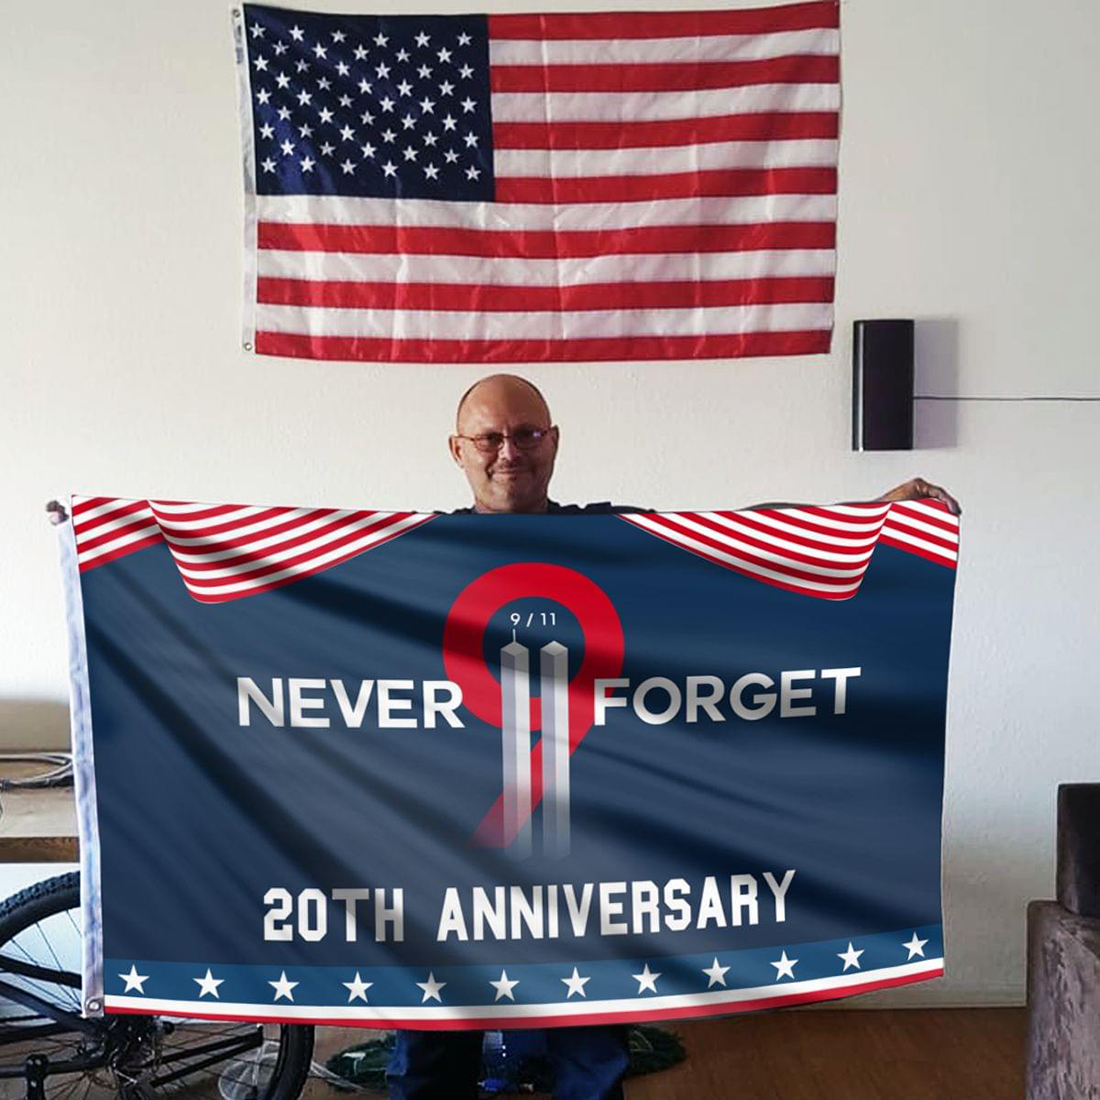 9/11 Never forget 20th anniversary flag